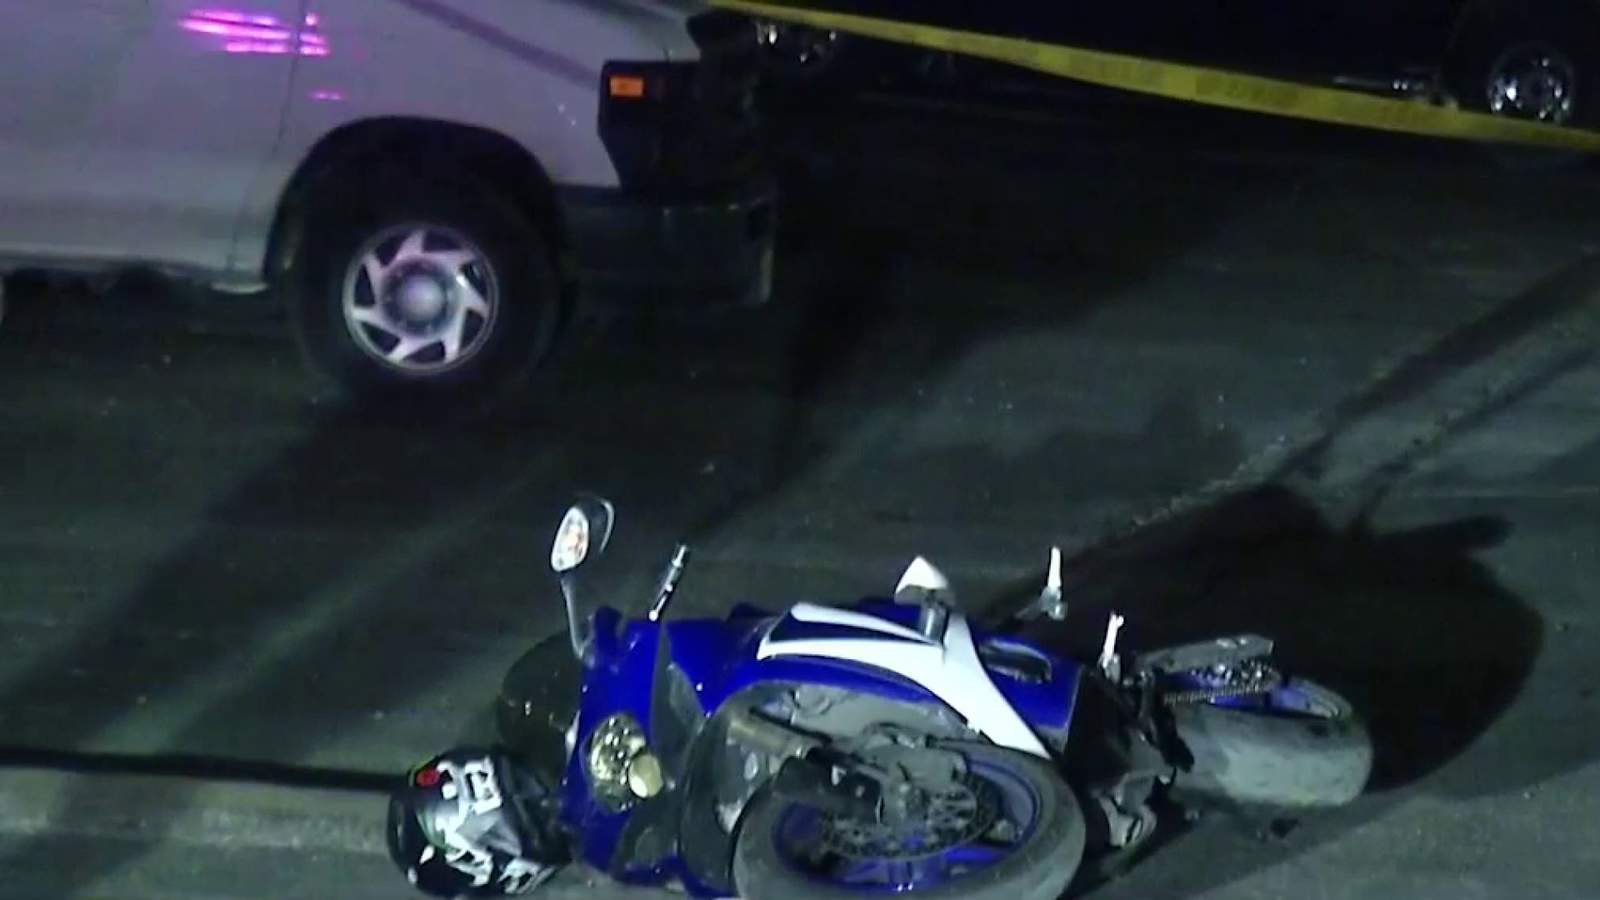 Motorcyclist shot by woman at Northwest Side apartment complex, police say